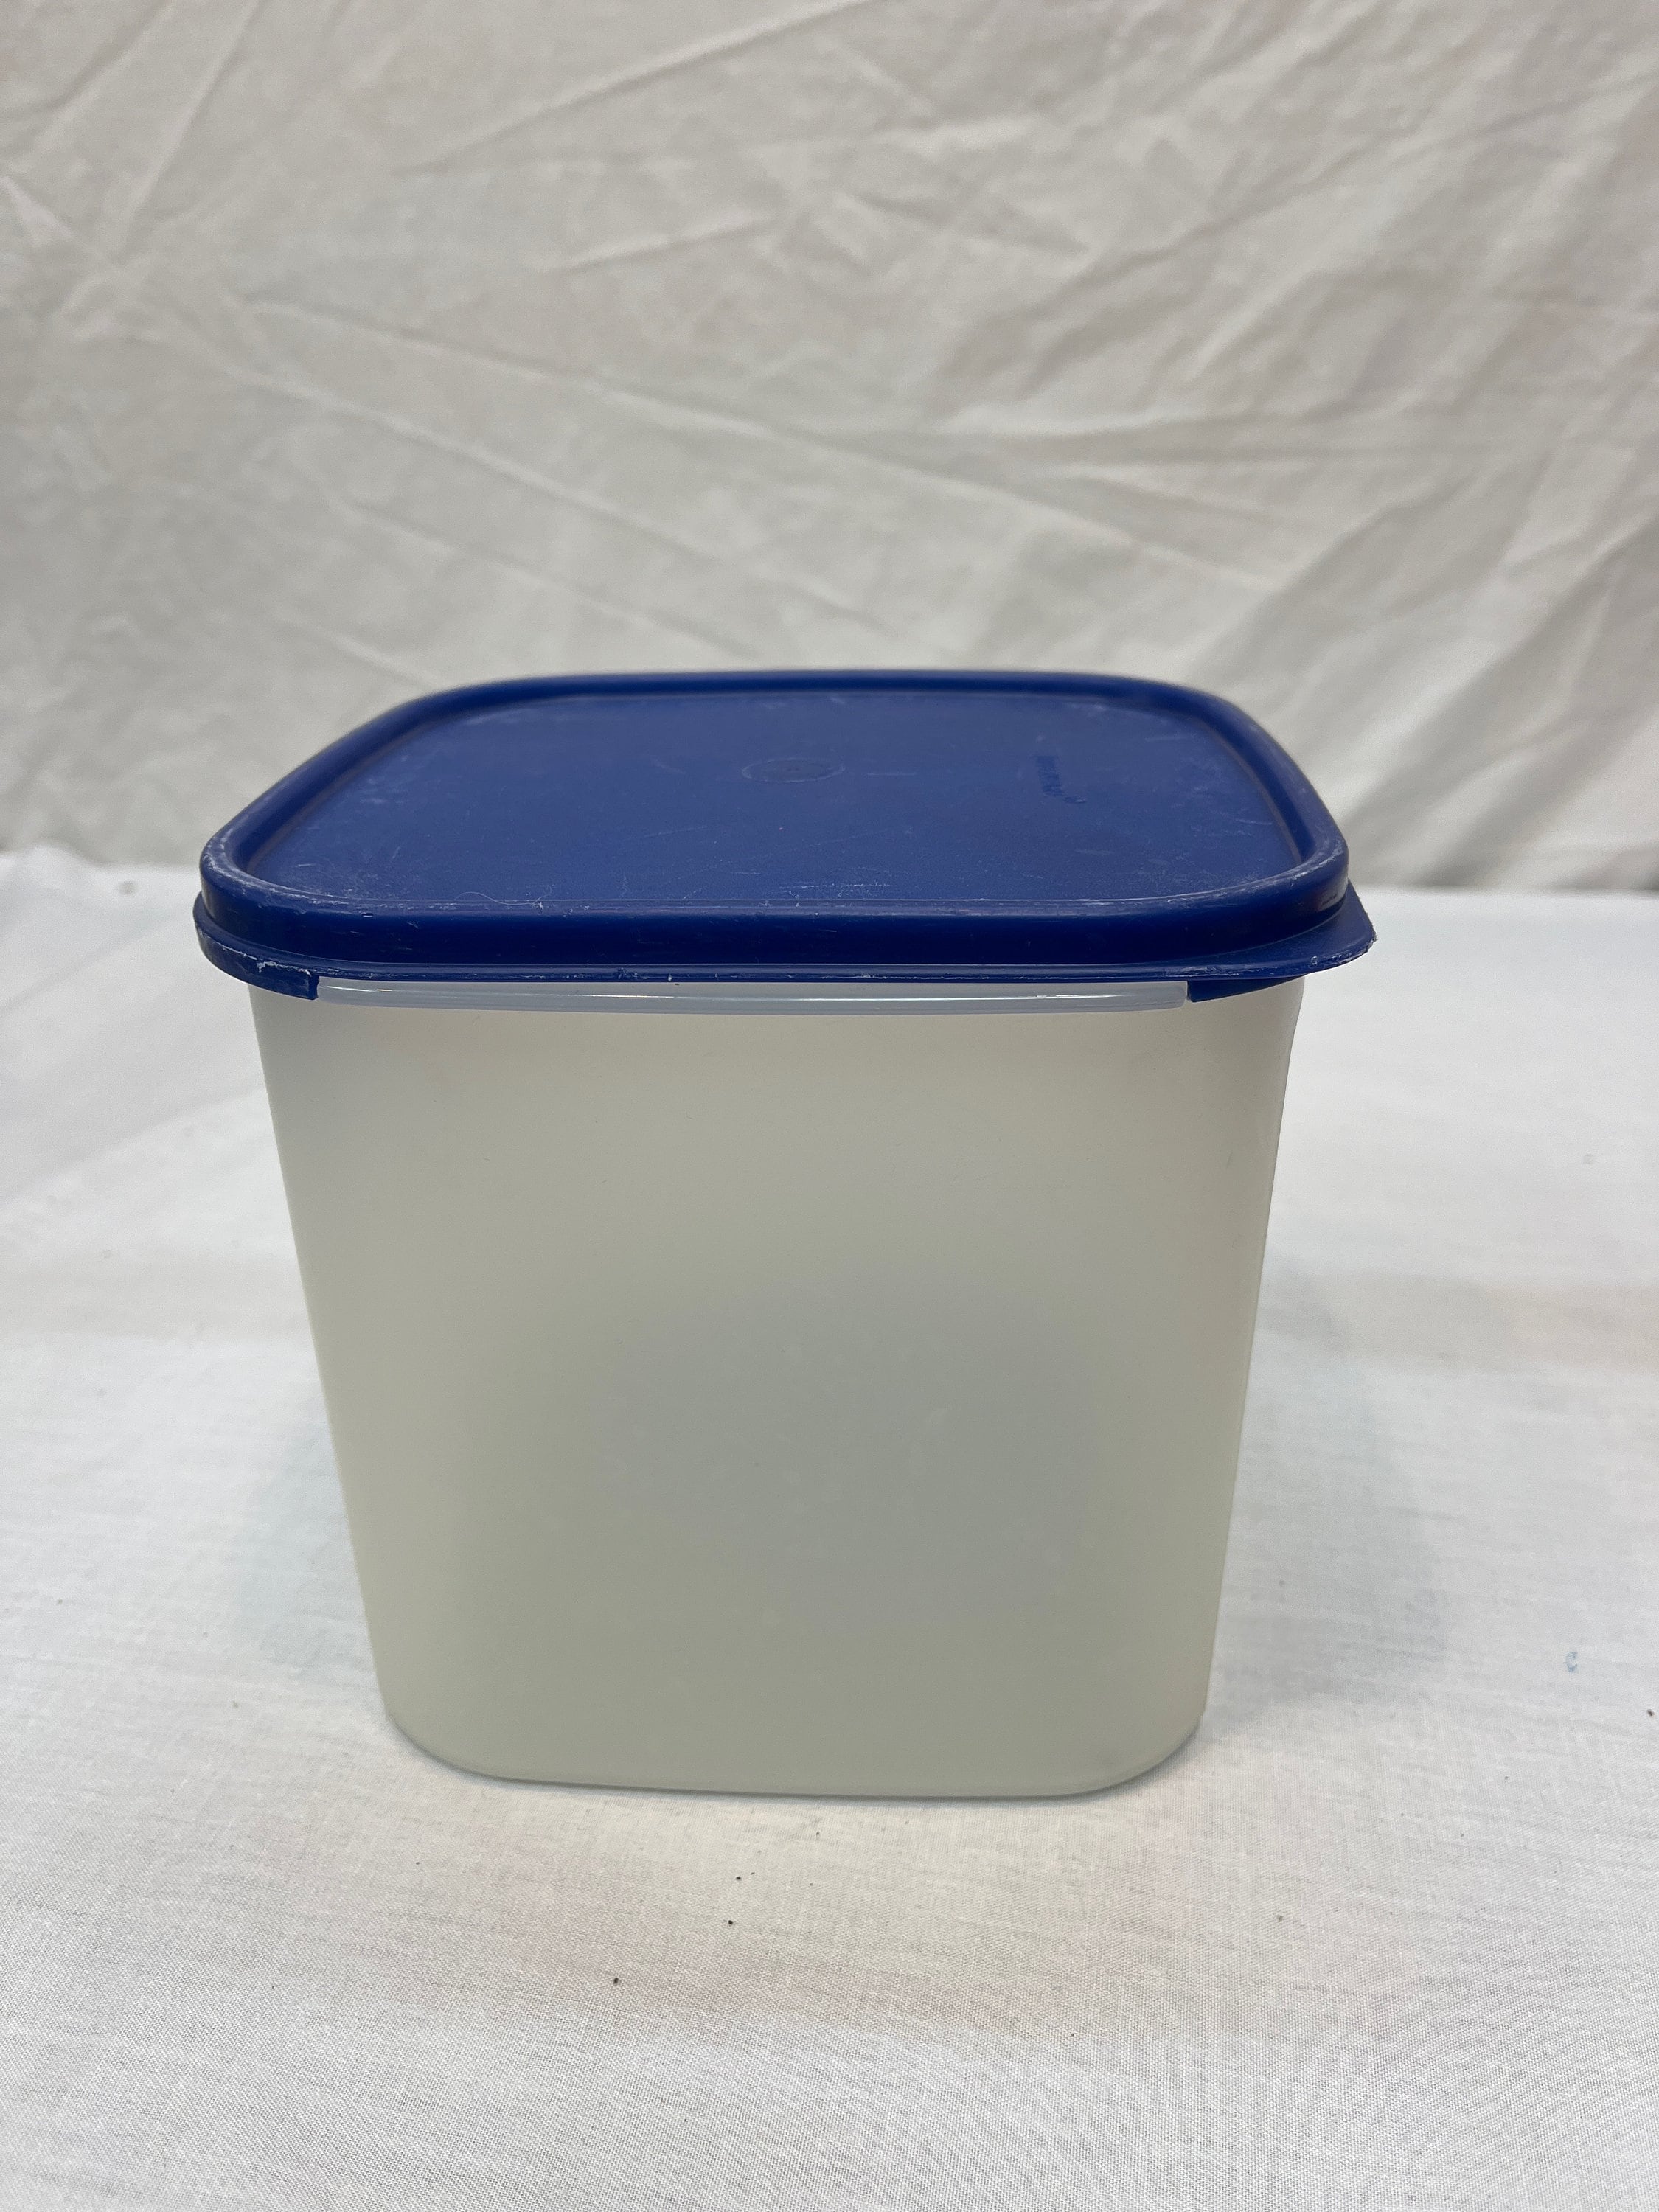 Vintage Tupperware Square Seal Storage Container / Extra Large 166 W/ Lid  223 Sheer Space Saving Stackable, Plastic, Portable Bake Sale 